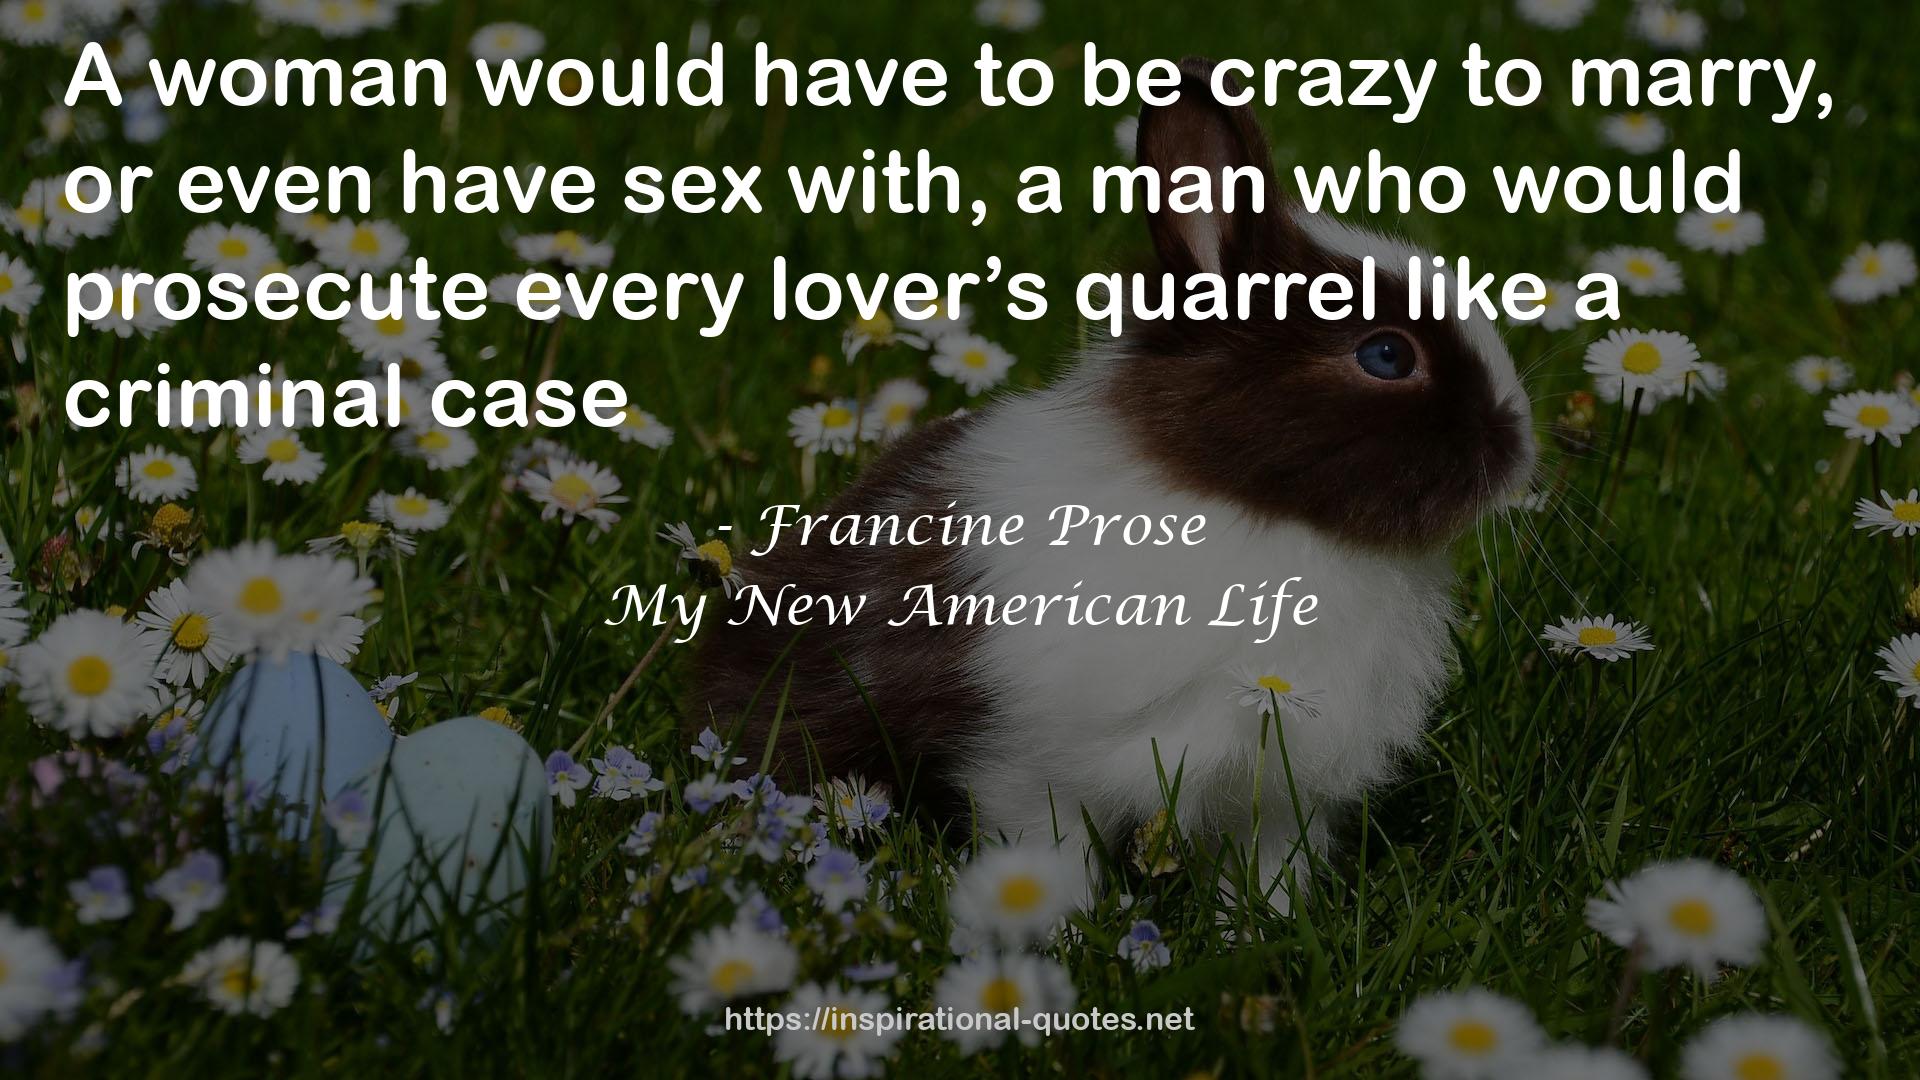 My New American Life QUOTES